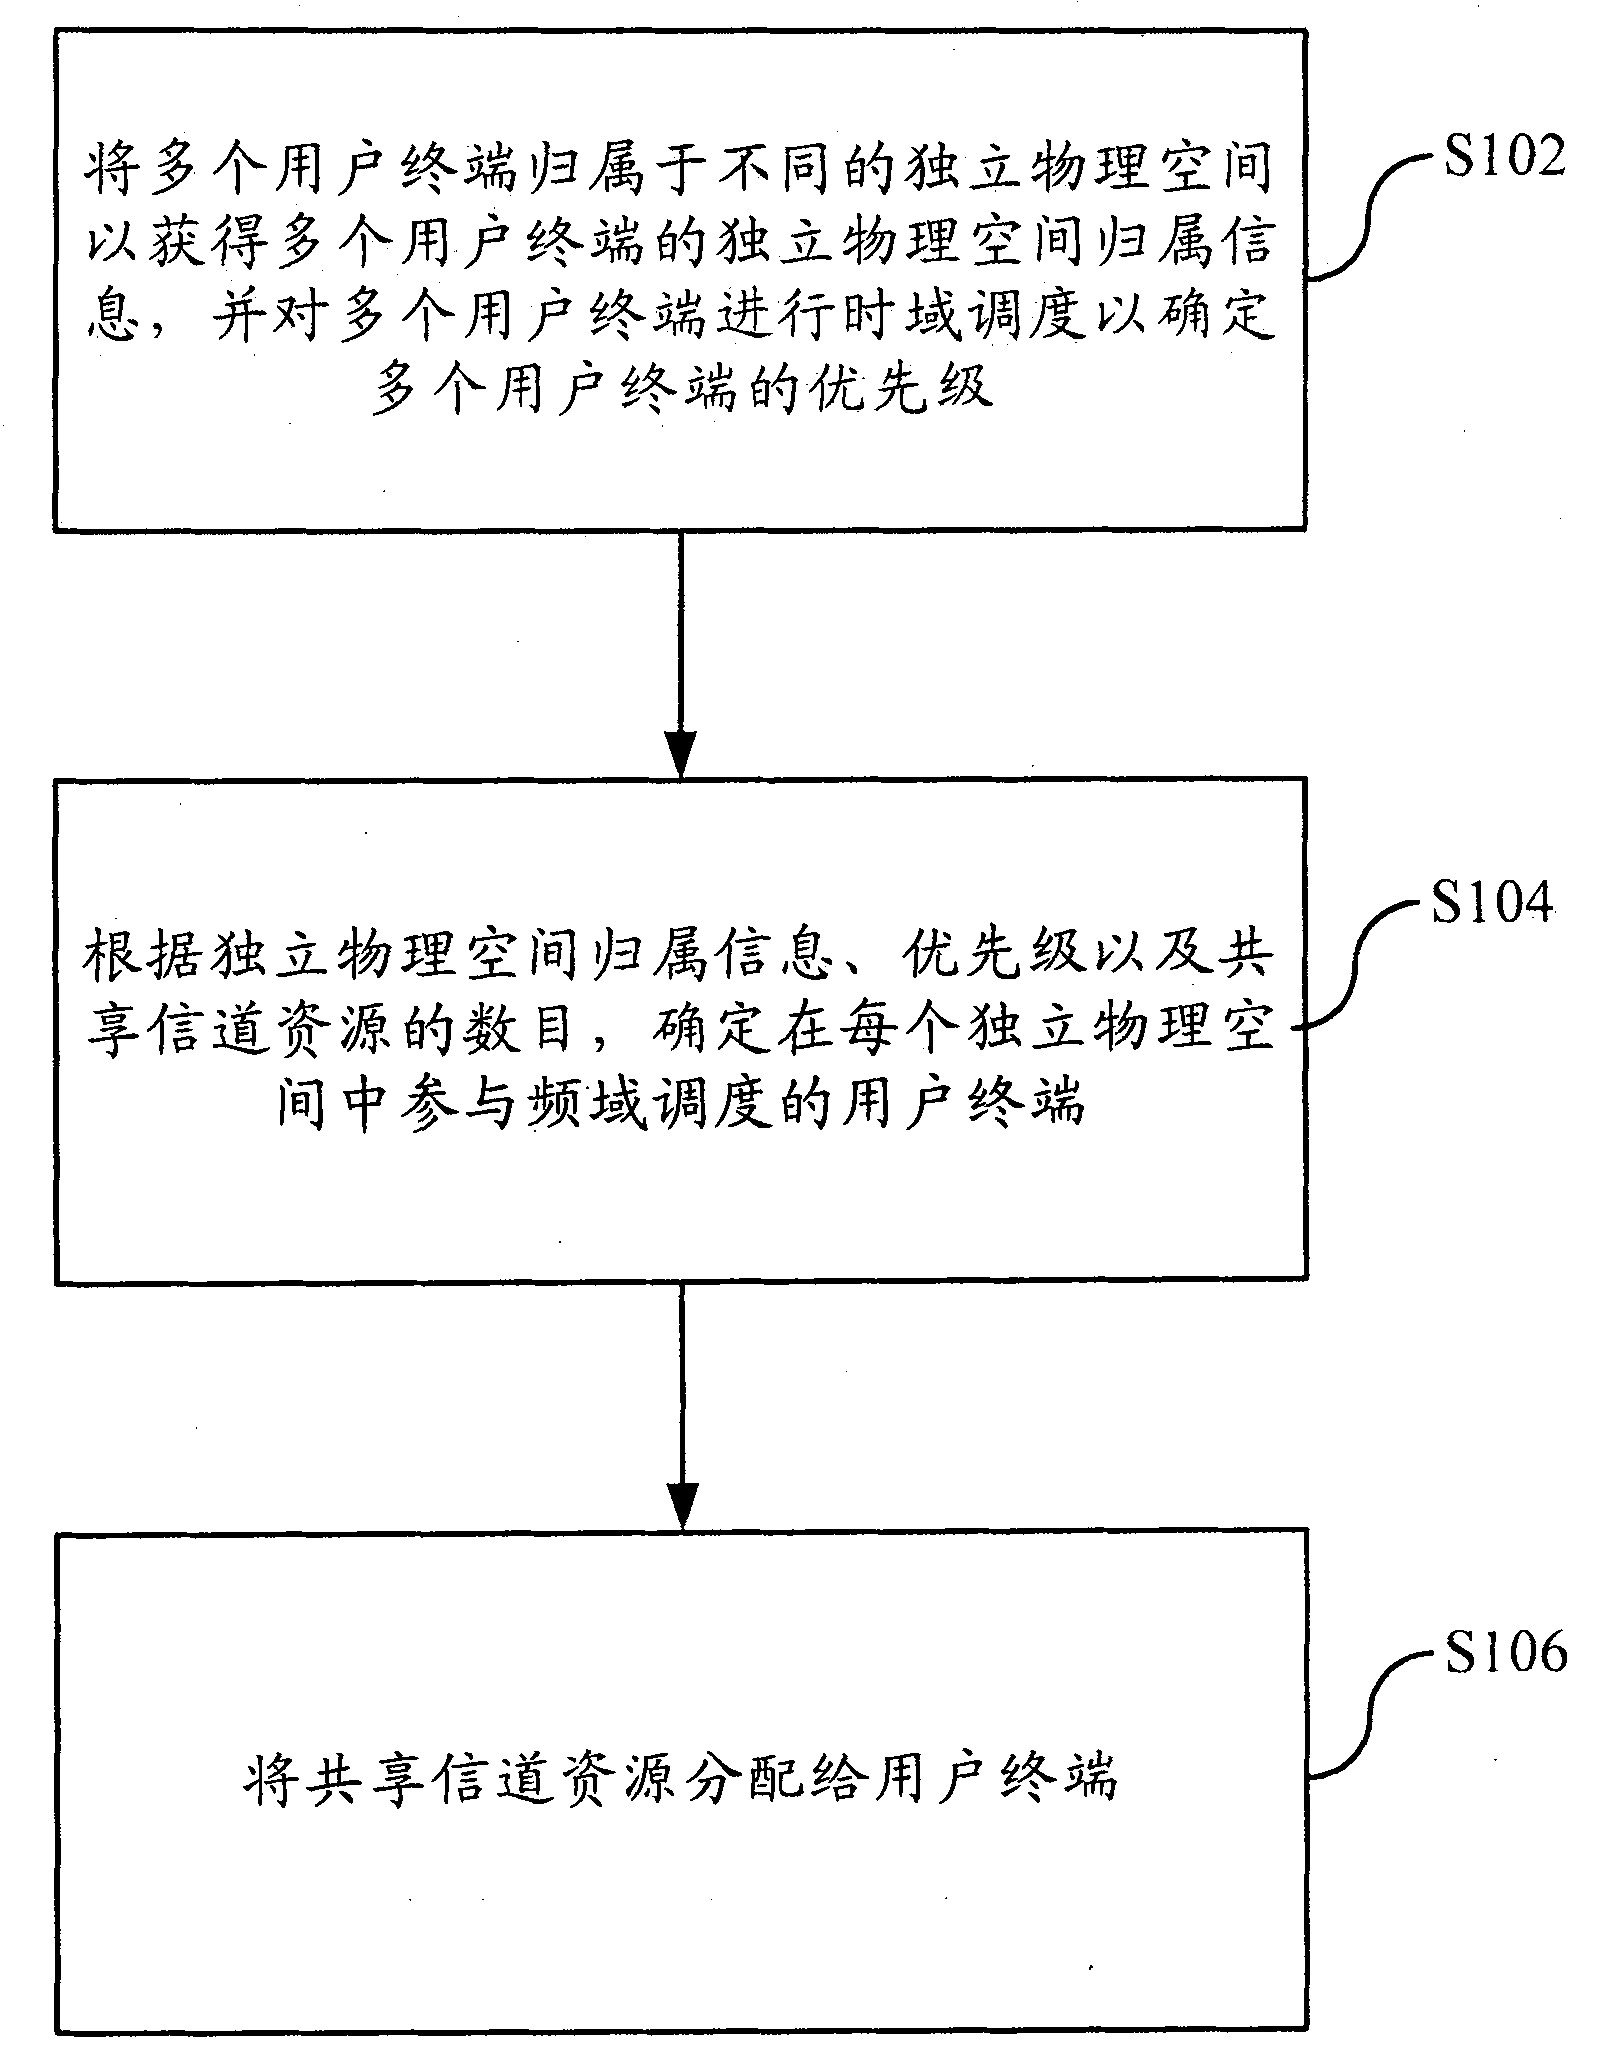 Shared channel resource allocation method and system based on space division multiplexing address (SDMA) technology